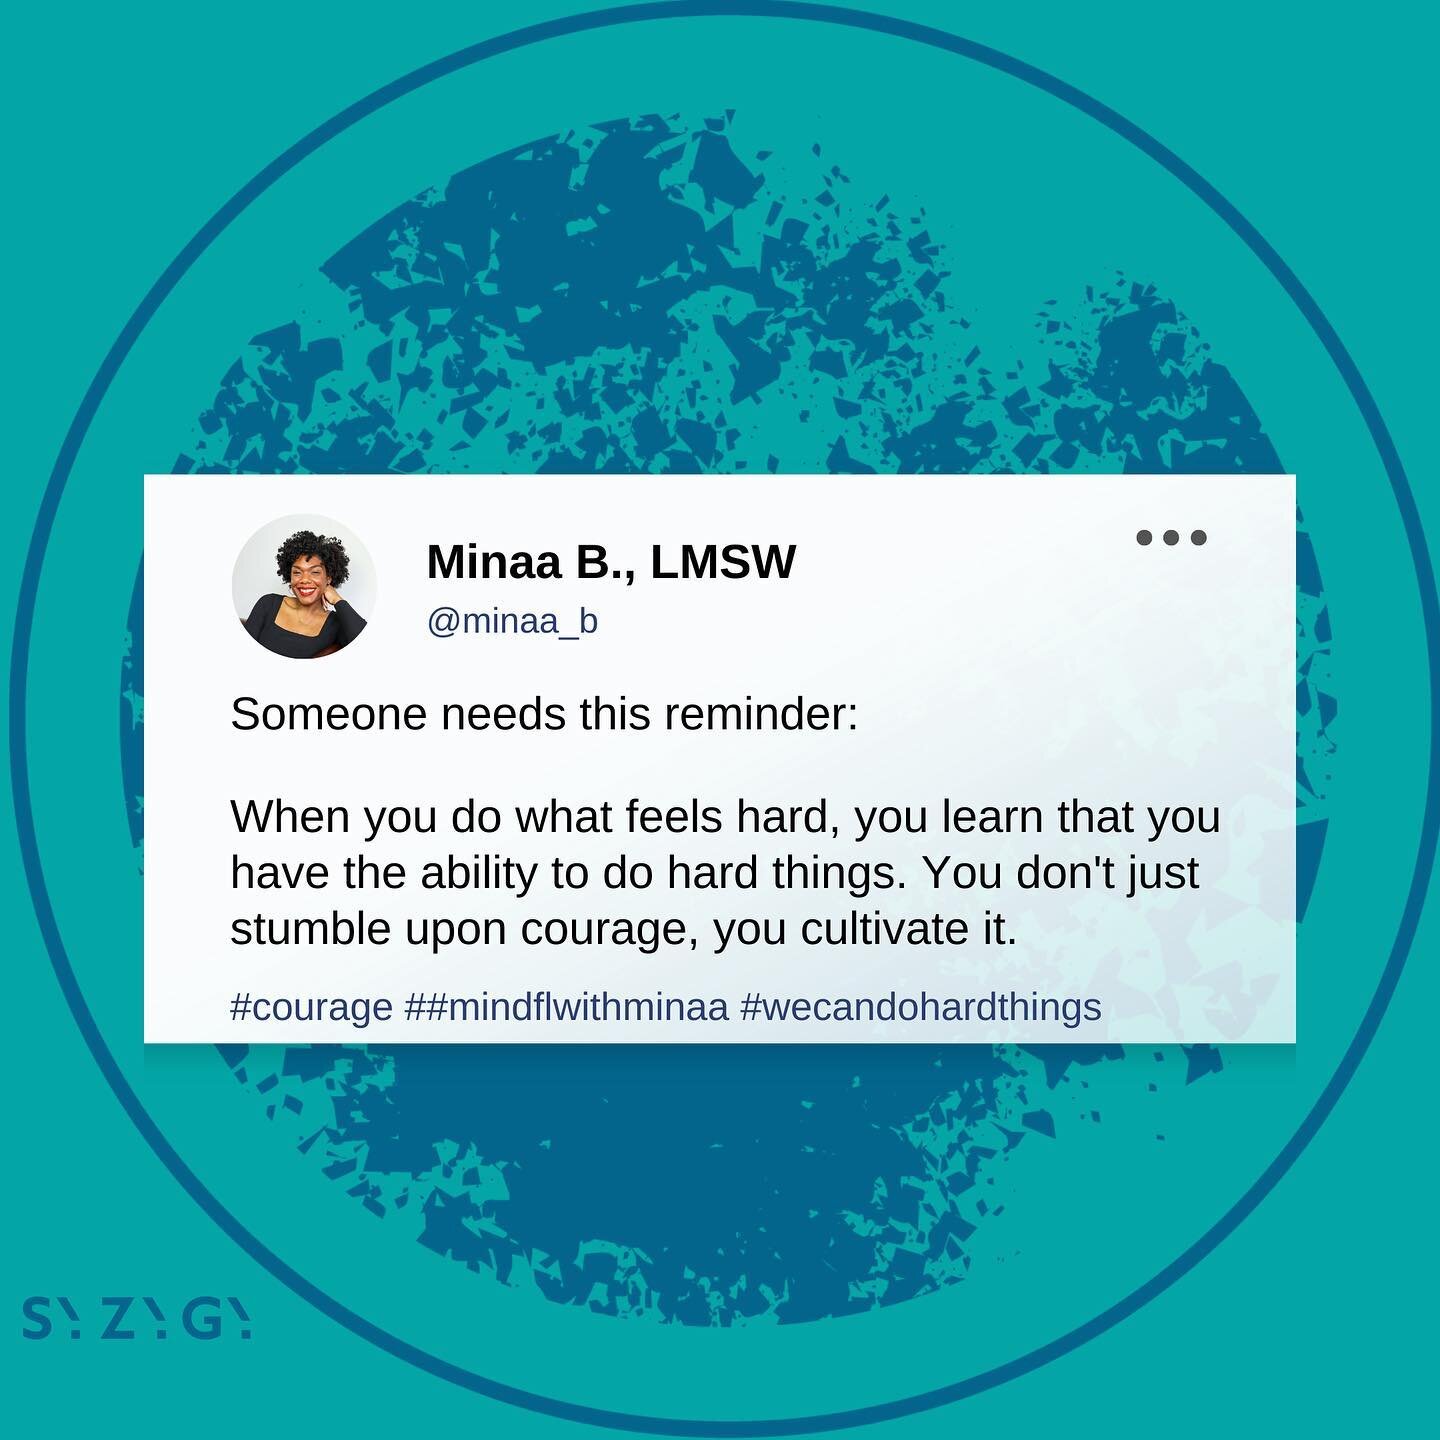 &quot;The only way we can grow is by doing what feels hard, and we won&rsquo;t know what hard things we are capable of achieving until we try.&quot; @minaa_b ⁣
⁣
#wecandohardthings #growth #alwaysinallways #capable #qotd #mindfulwithminaa #courage